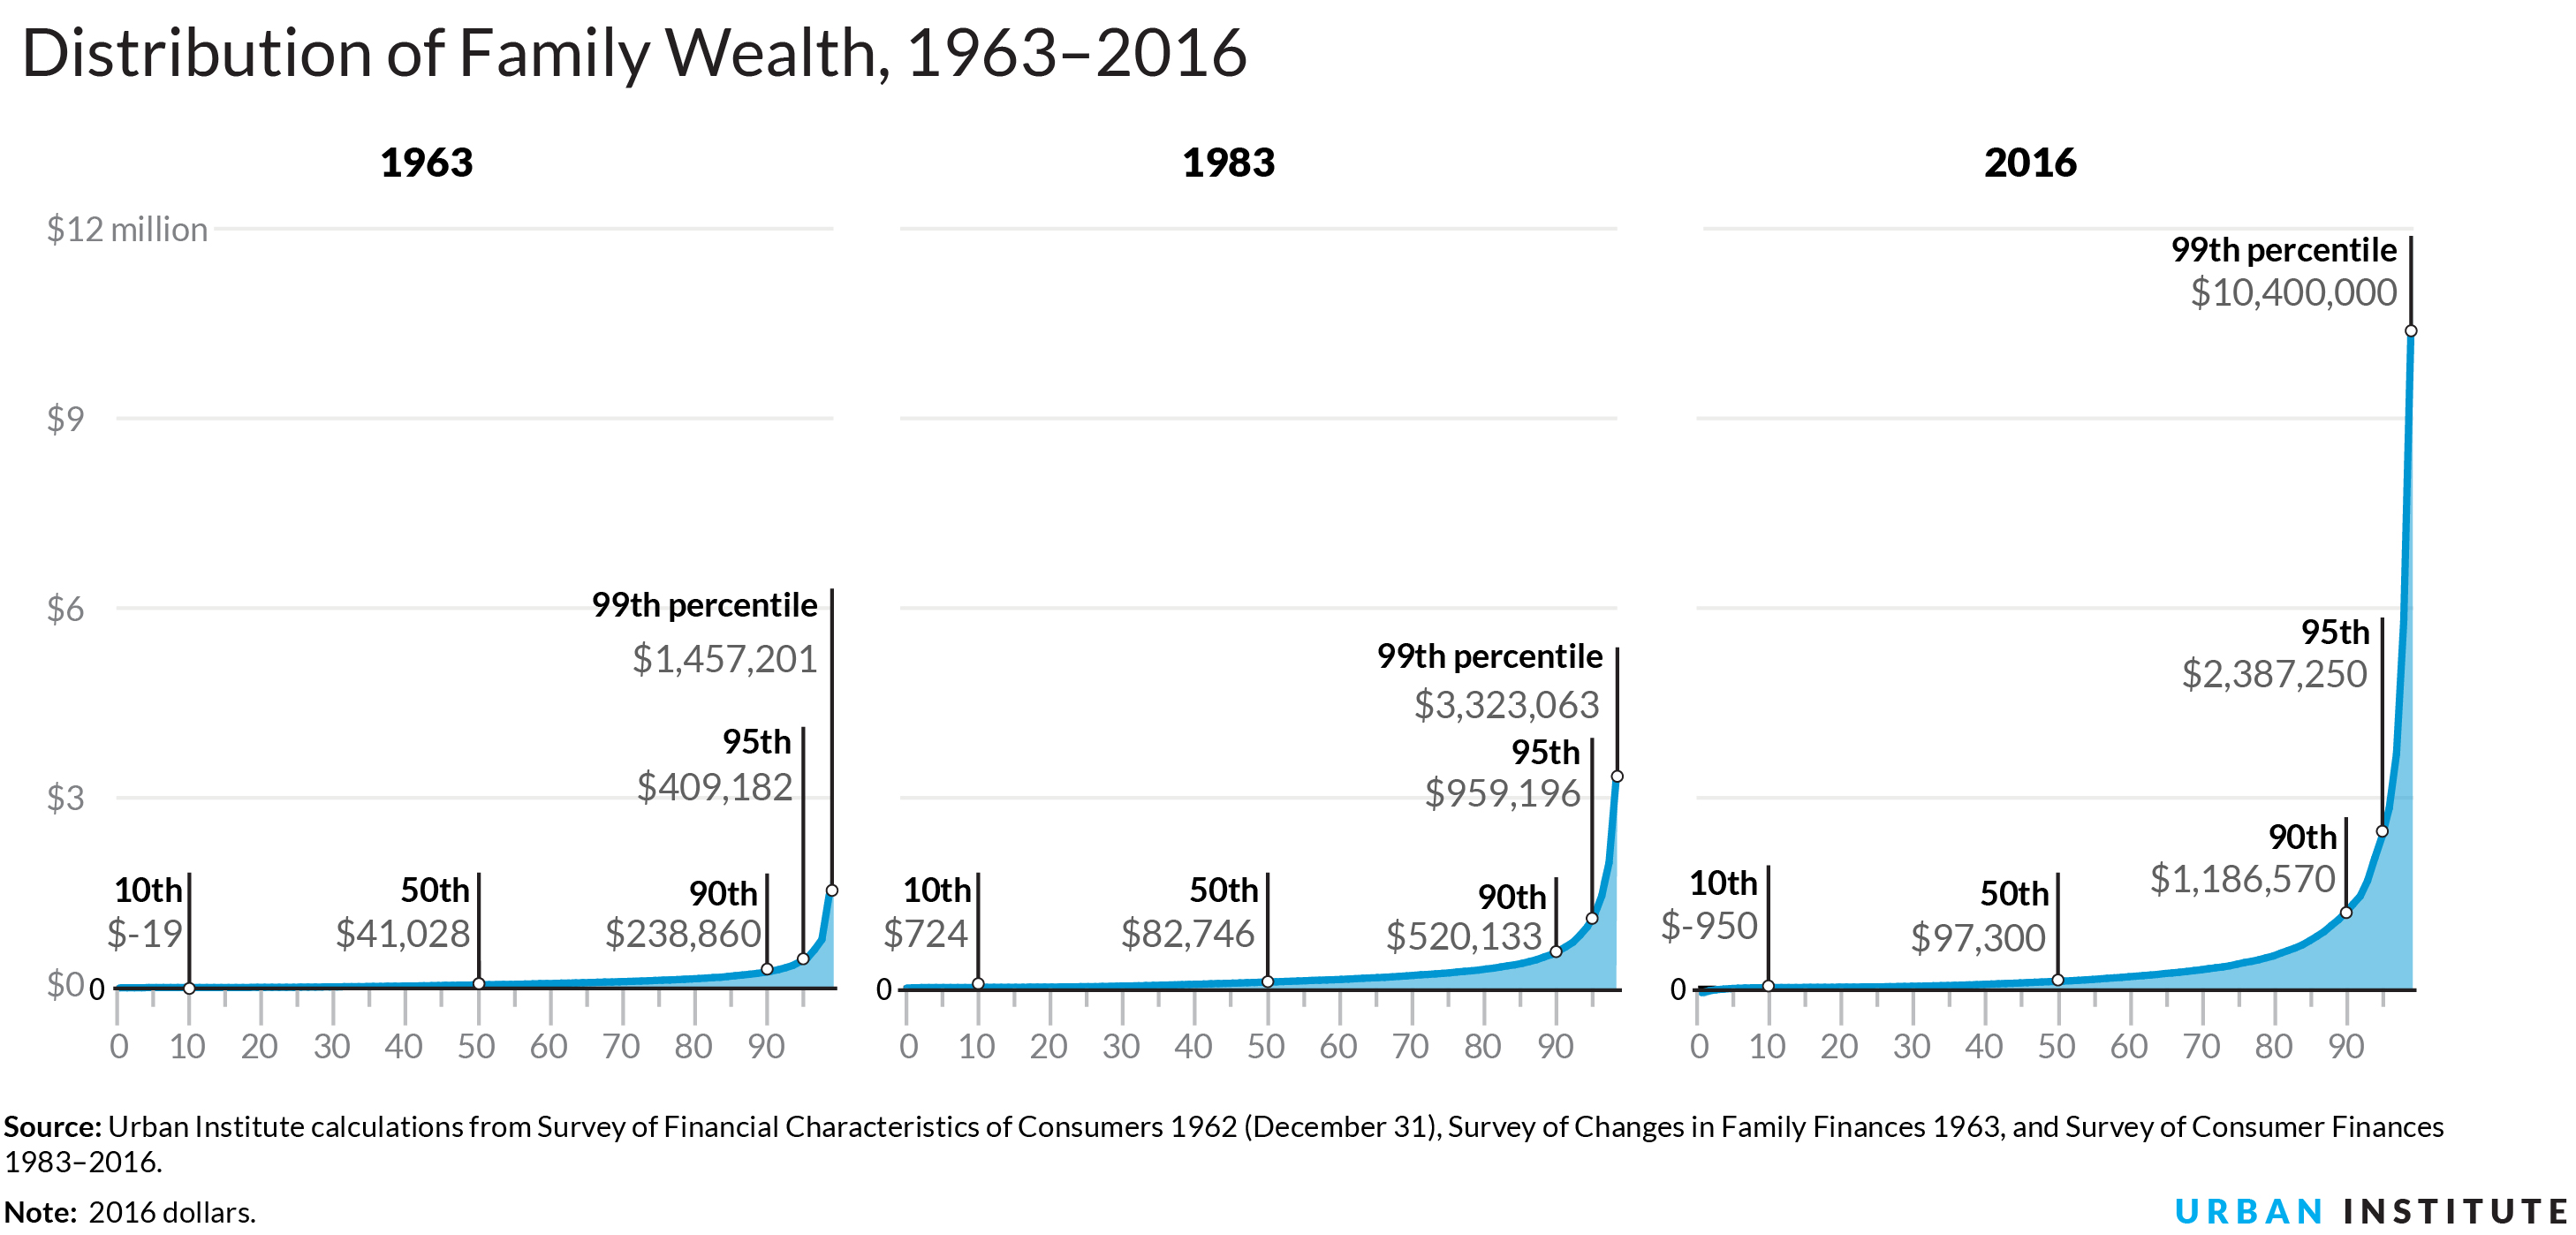 Distribution of Family Wealth, 1963-2016